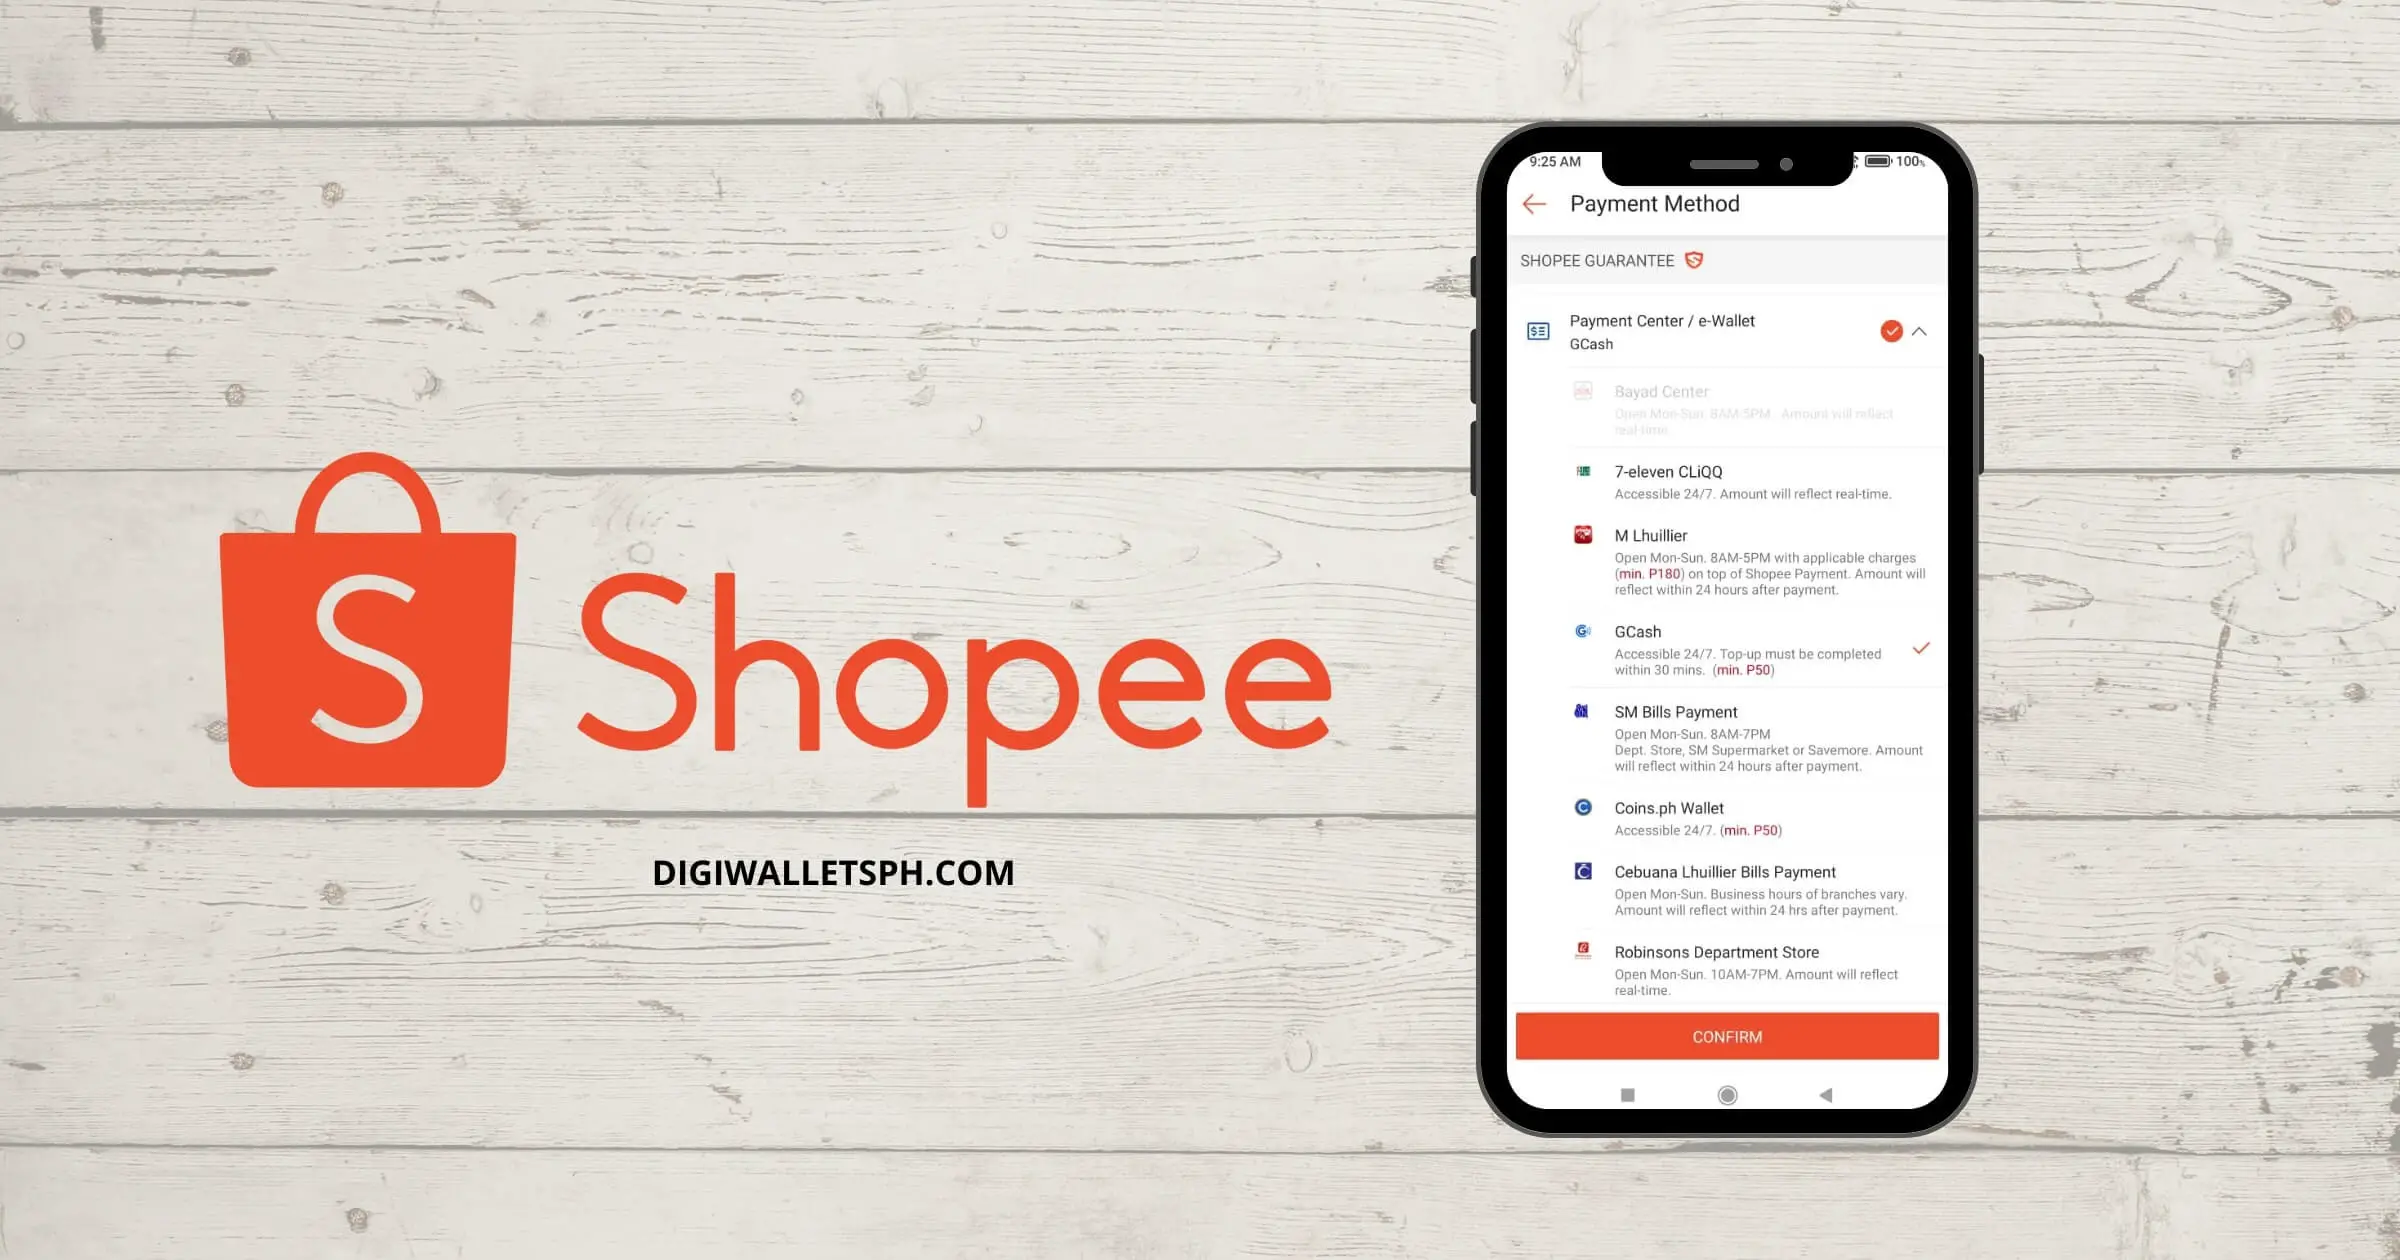 How to use GCredit in Shopee